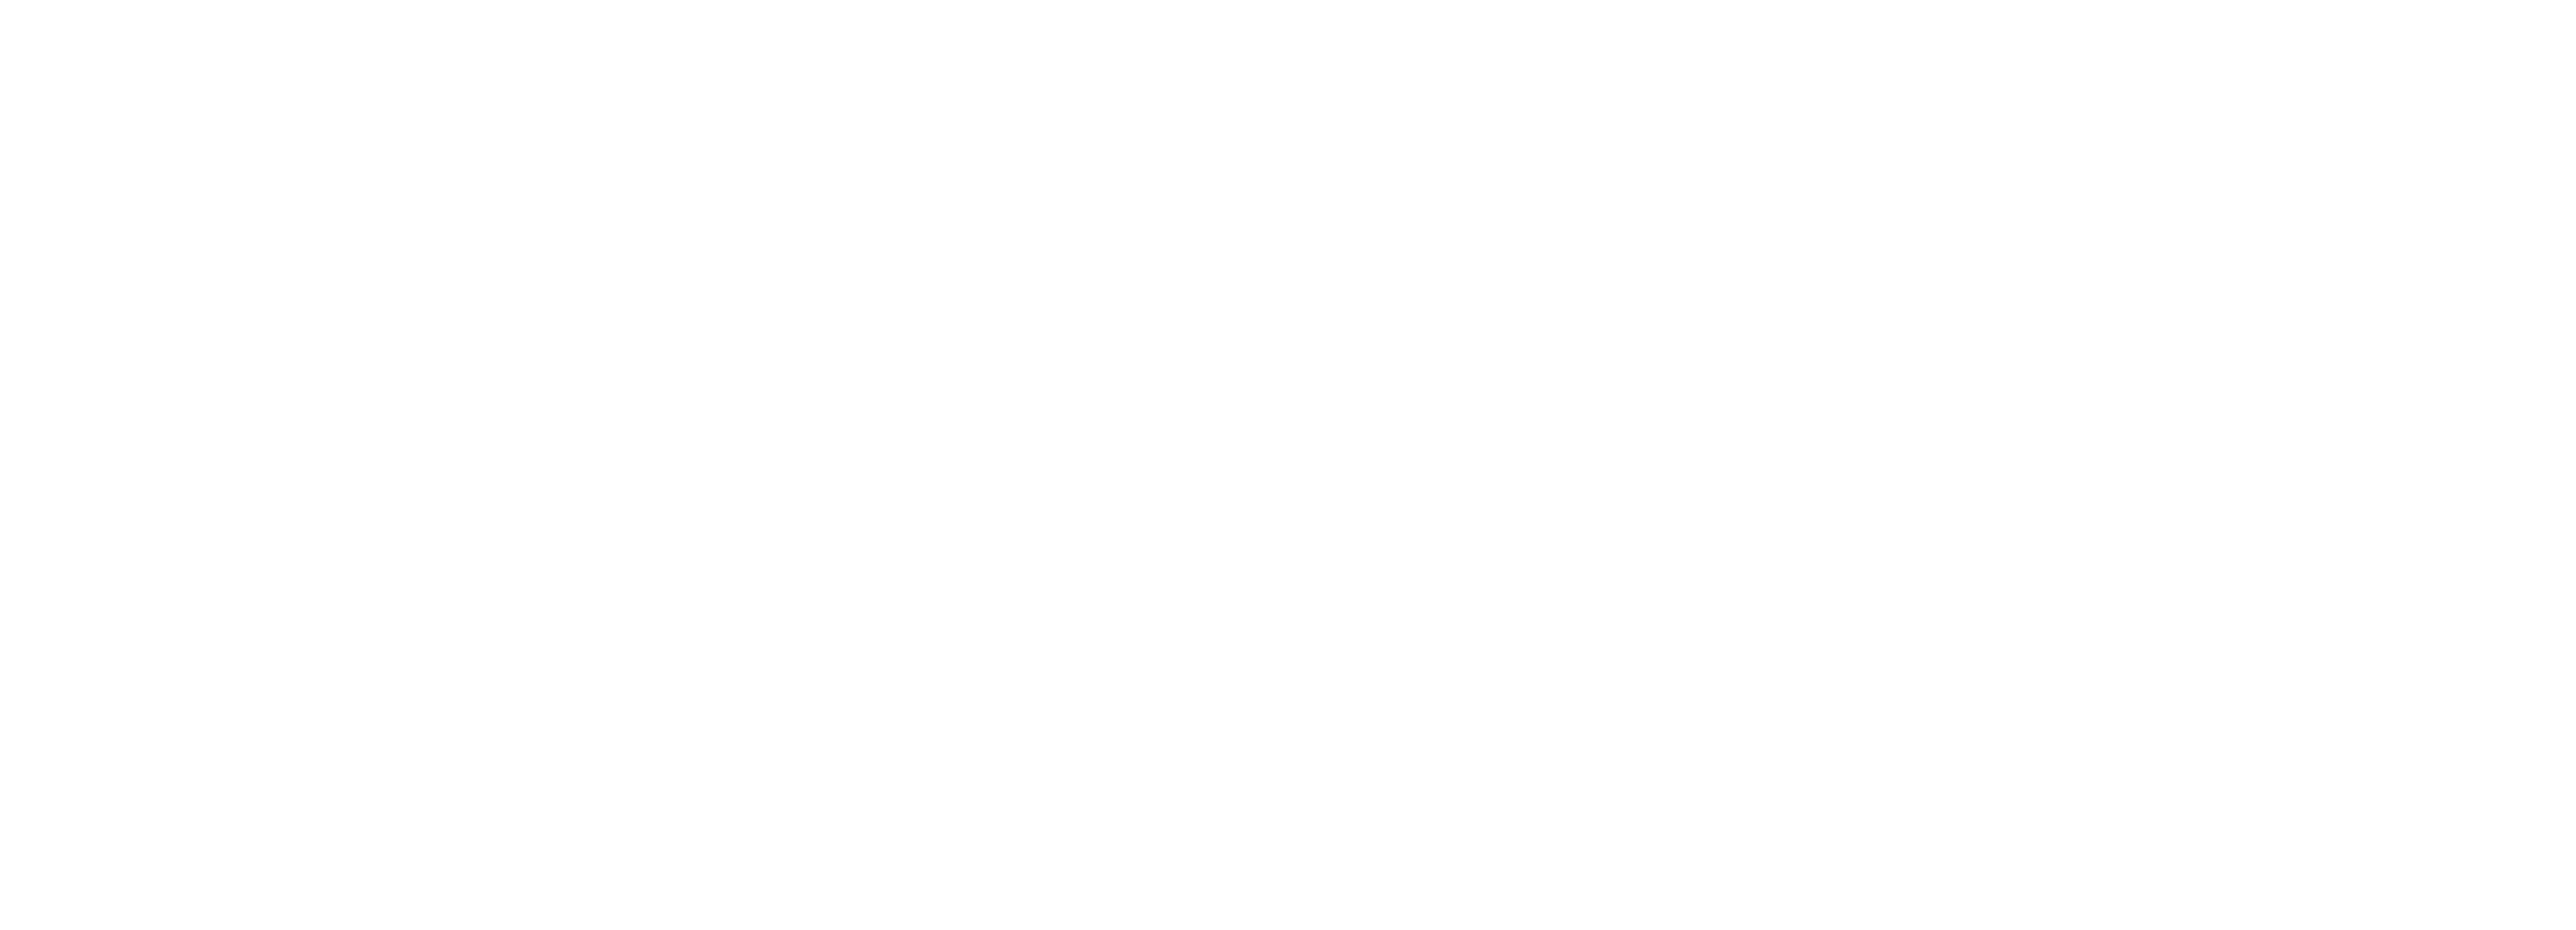 DIANAVE